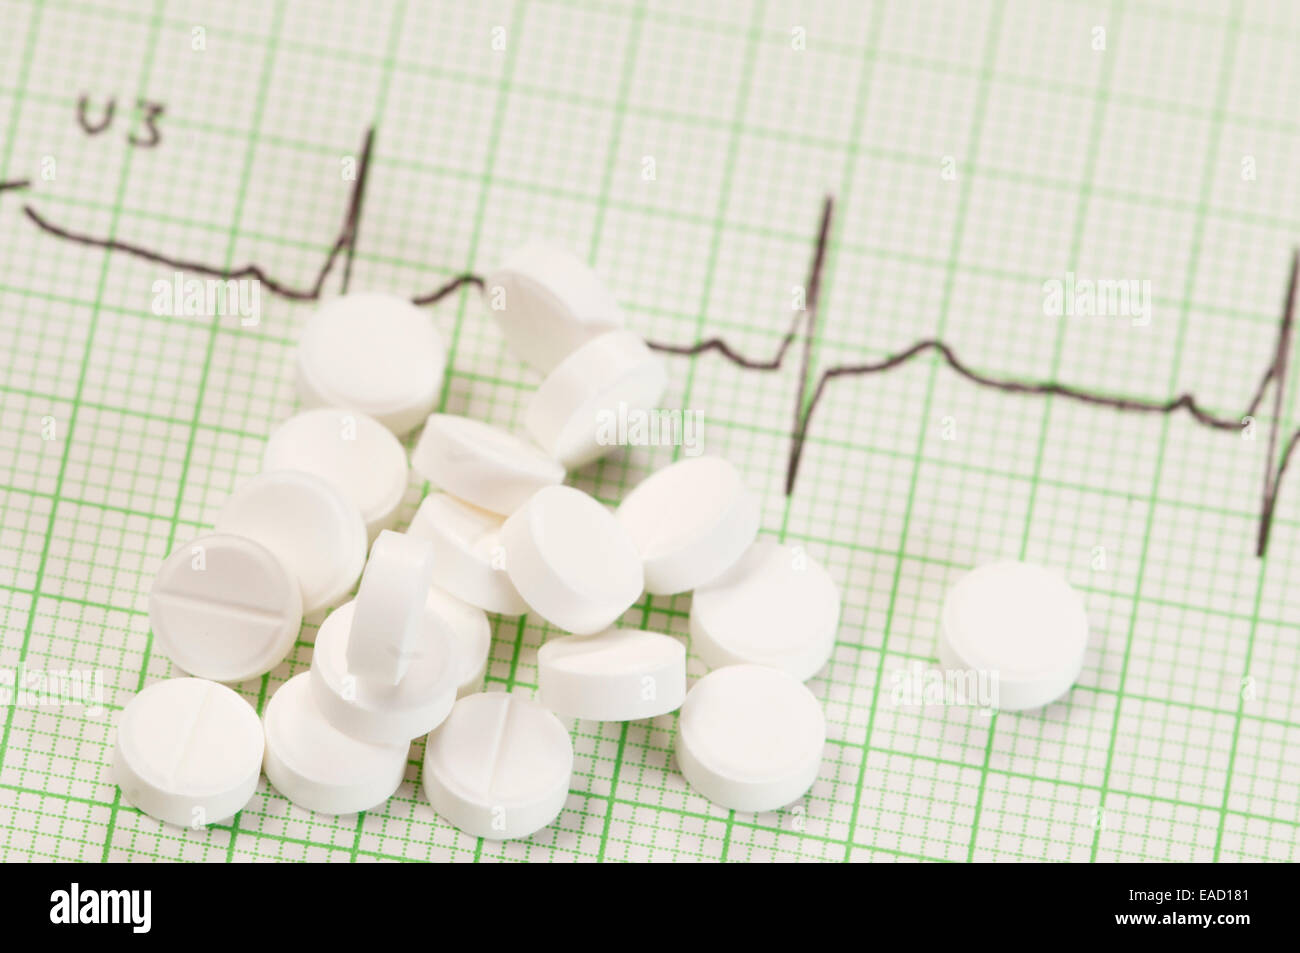 Tablets on electrocardiogram paper, closeup shot, local focus Stock Photo